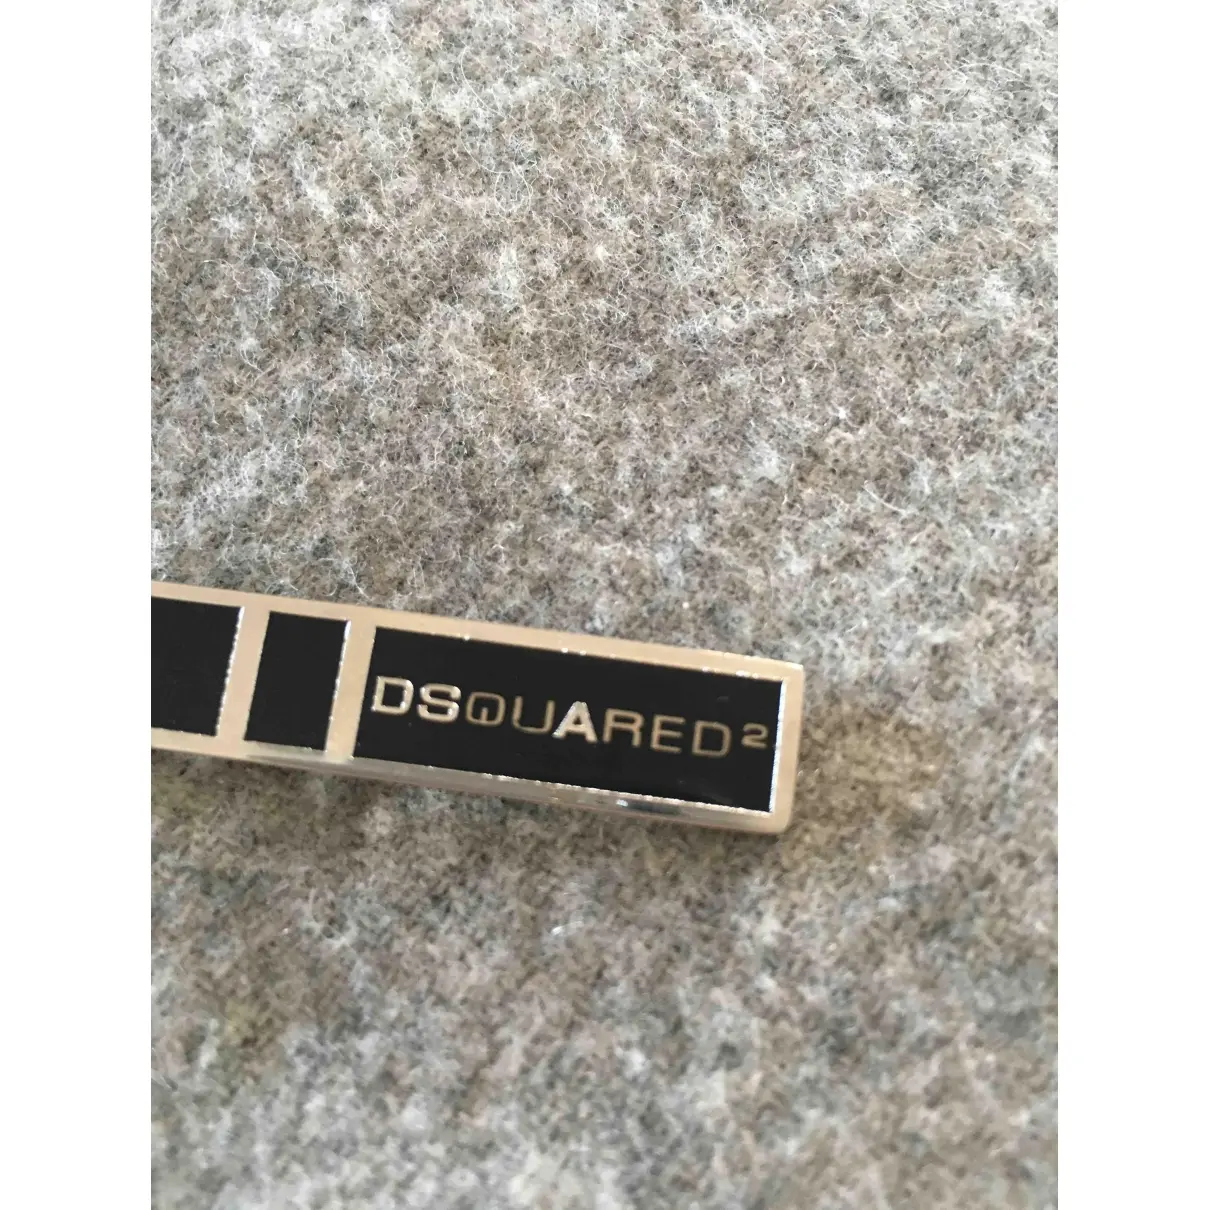 Dsquared2 Jewellery for sale